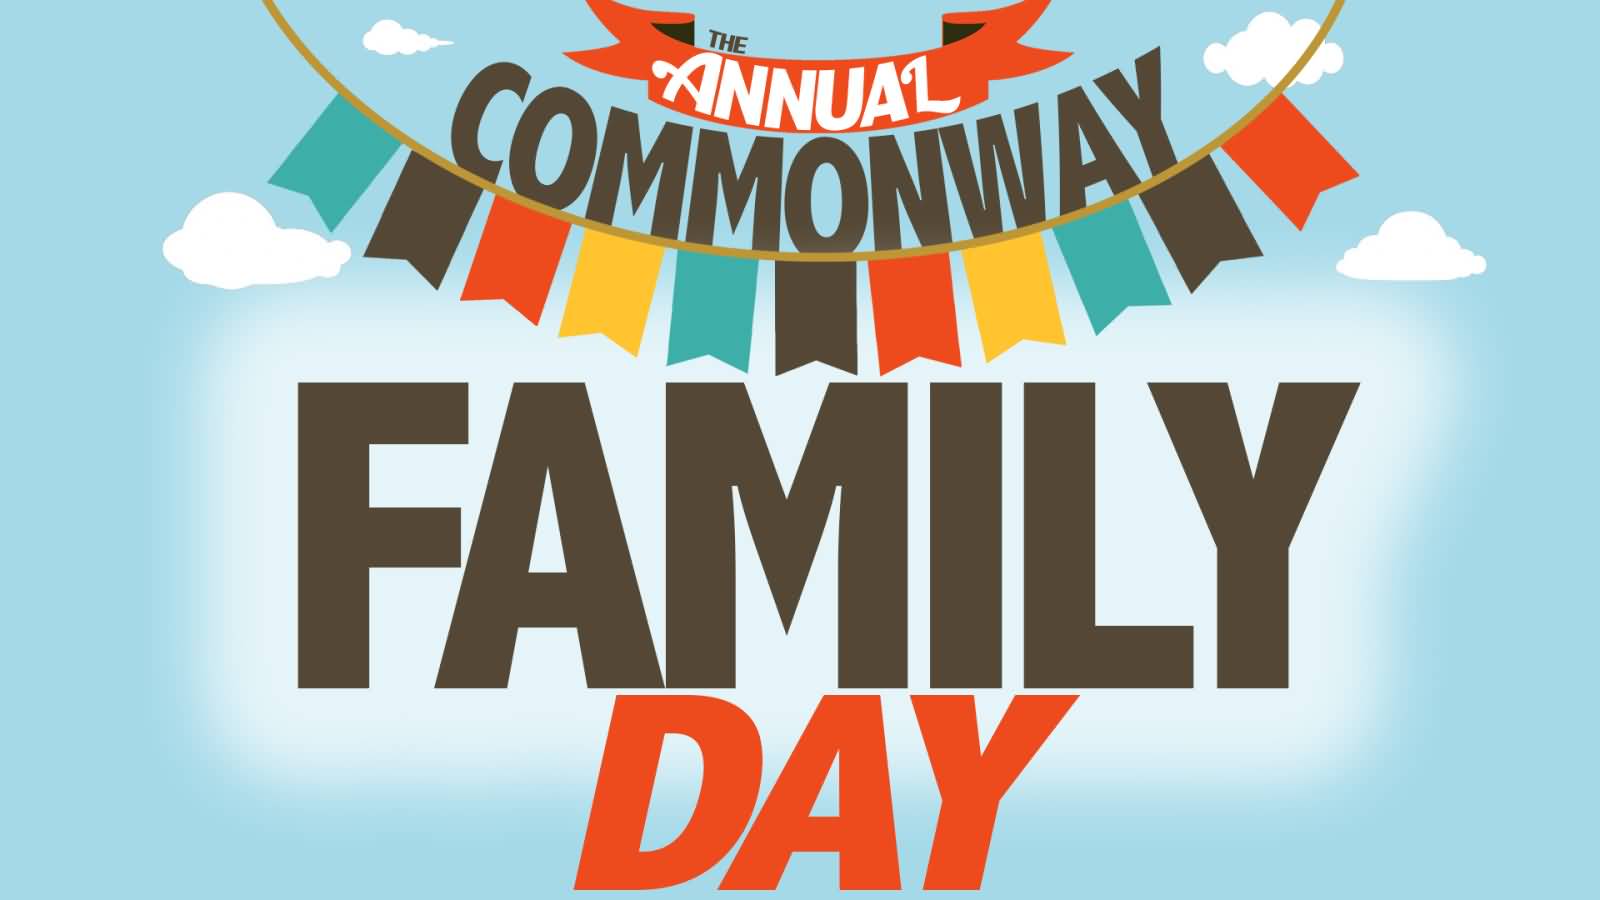 The Annual Commonway Family Day